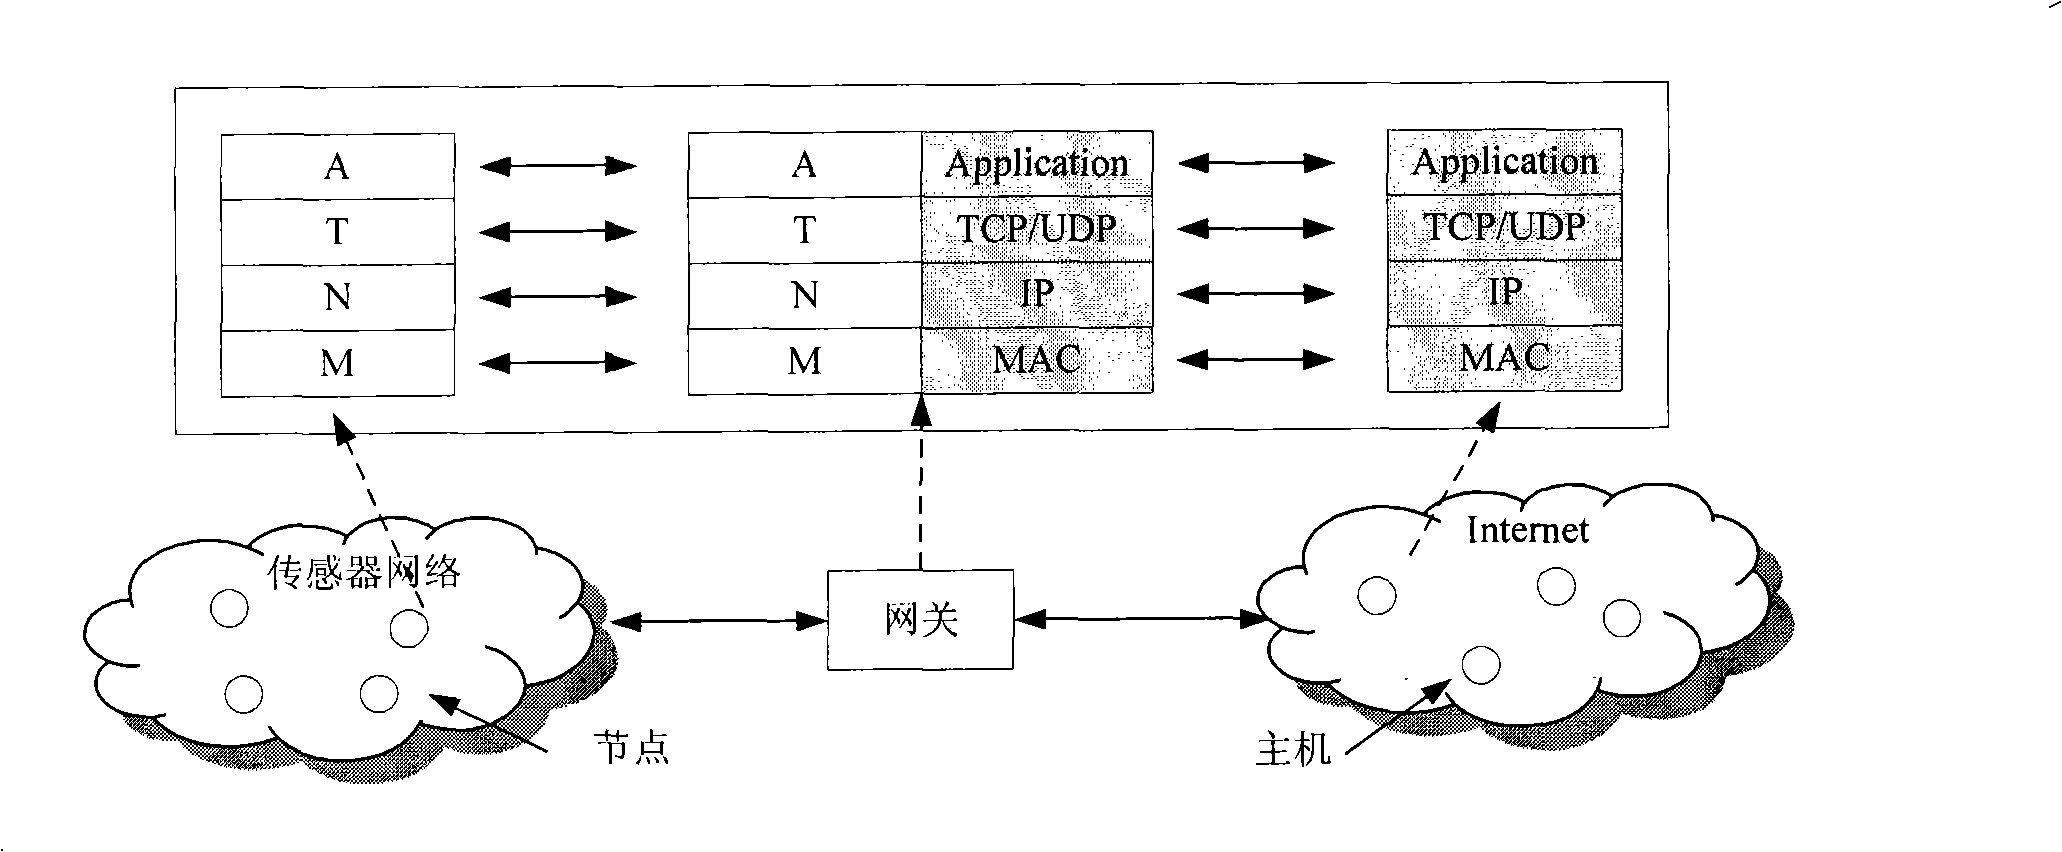 WSN access Internet network architecture and service providing method